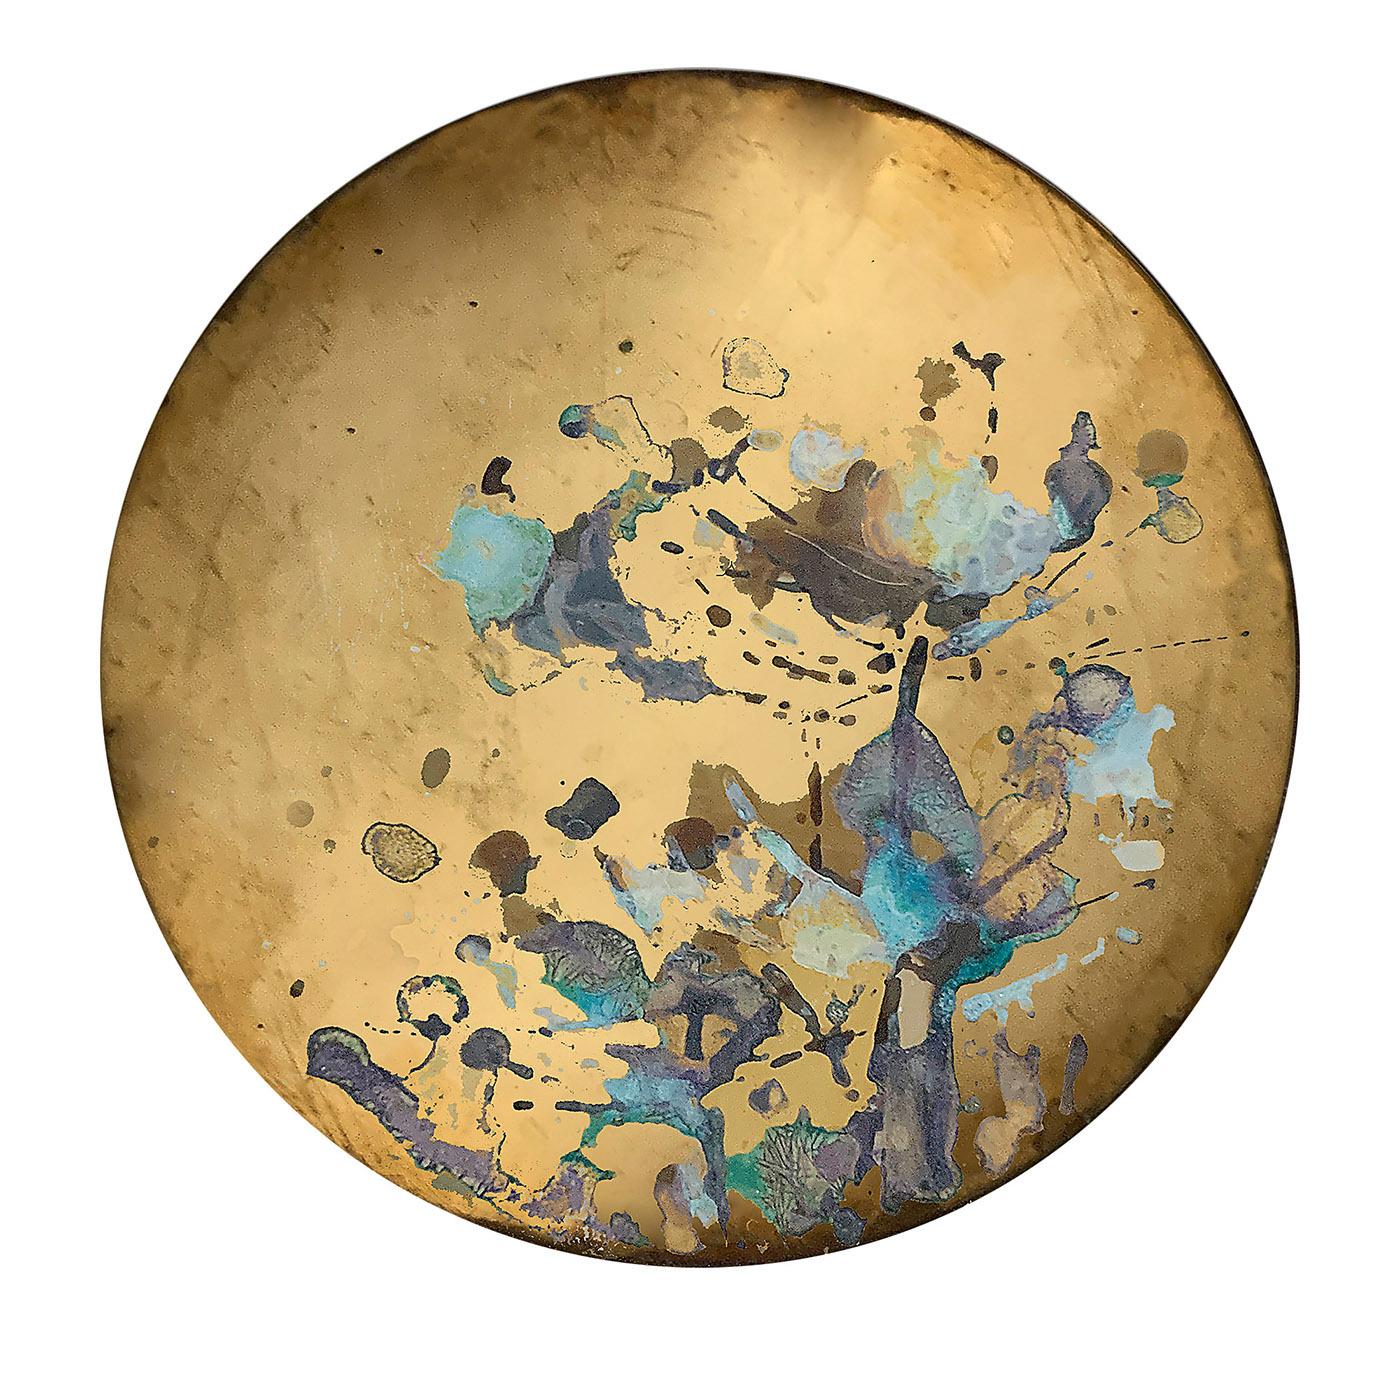 Recalling superb Impressionist artworks, this stunning set of six coasters is deftly hand-crafted and -decorated employing acids and oxides, the resulting polychrome mottled design standing out against the brass disks. A specific antioxidant is